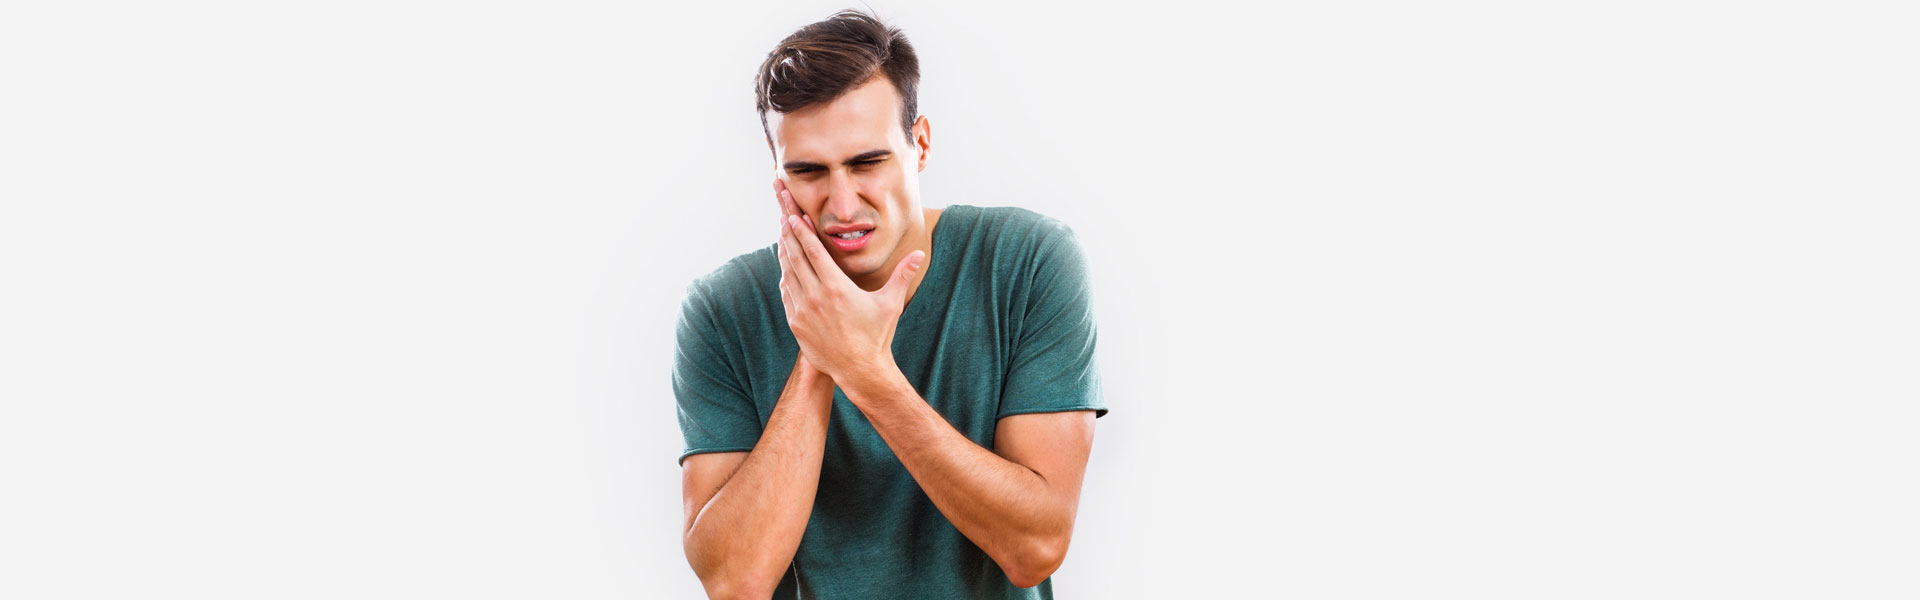 Chipped or Broken Tooth? Call Your Emergency Dentist in Pasadena